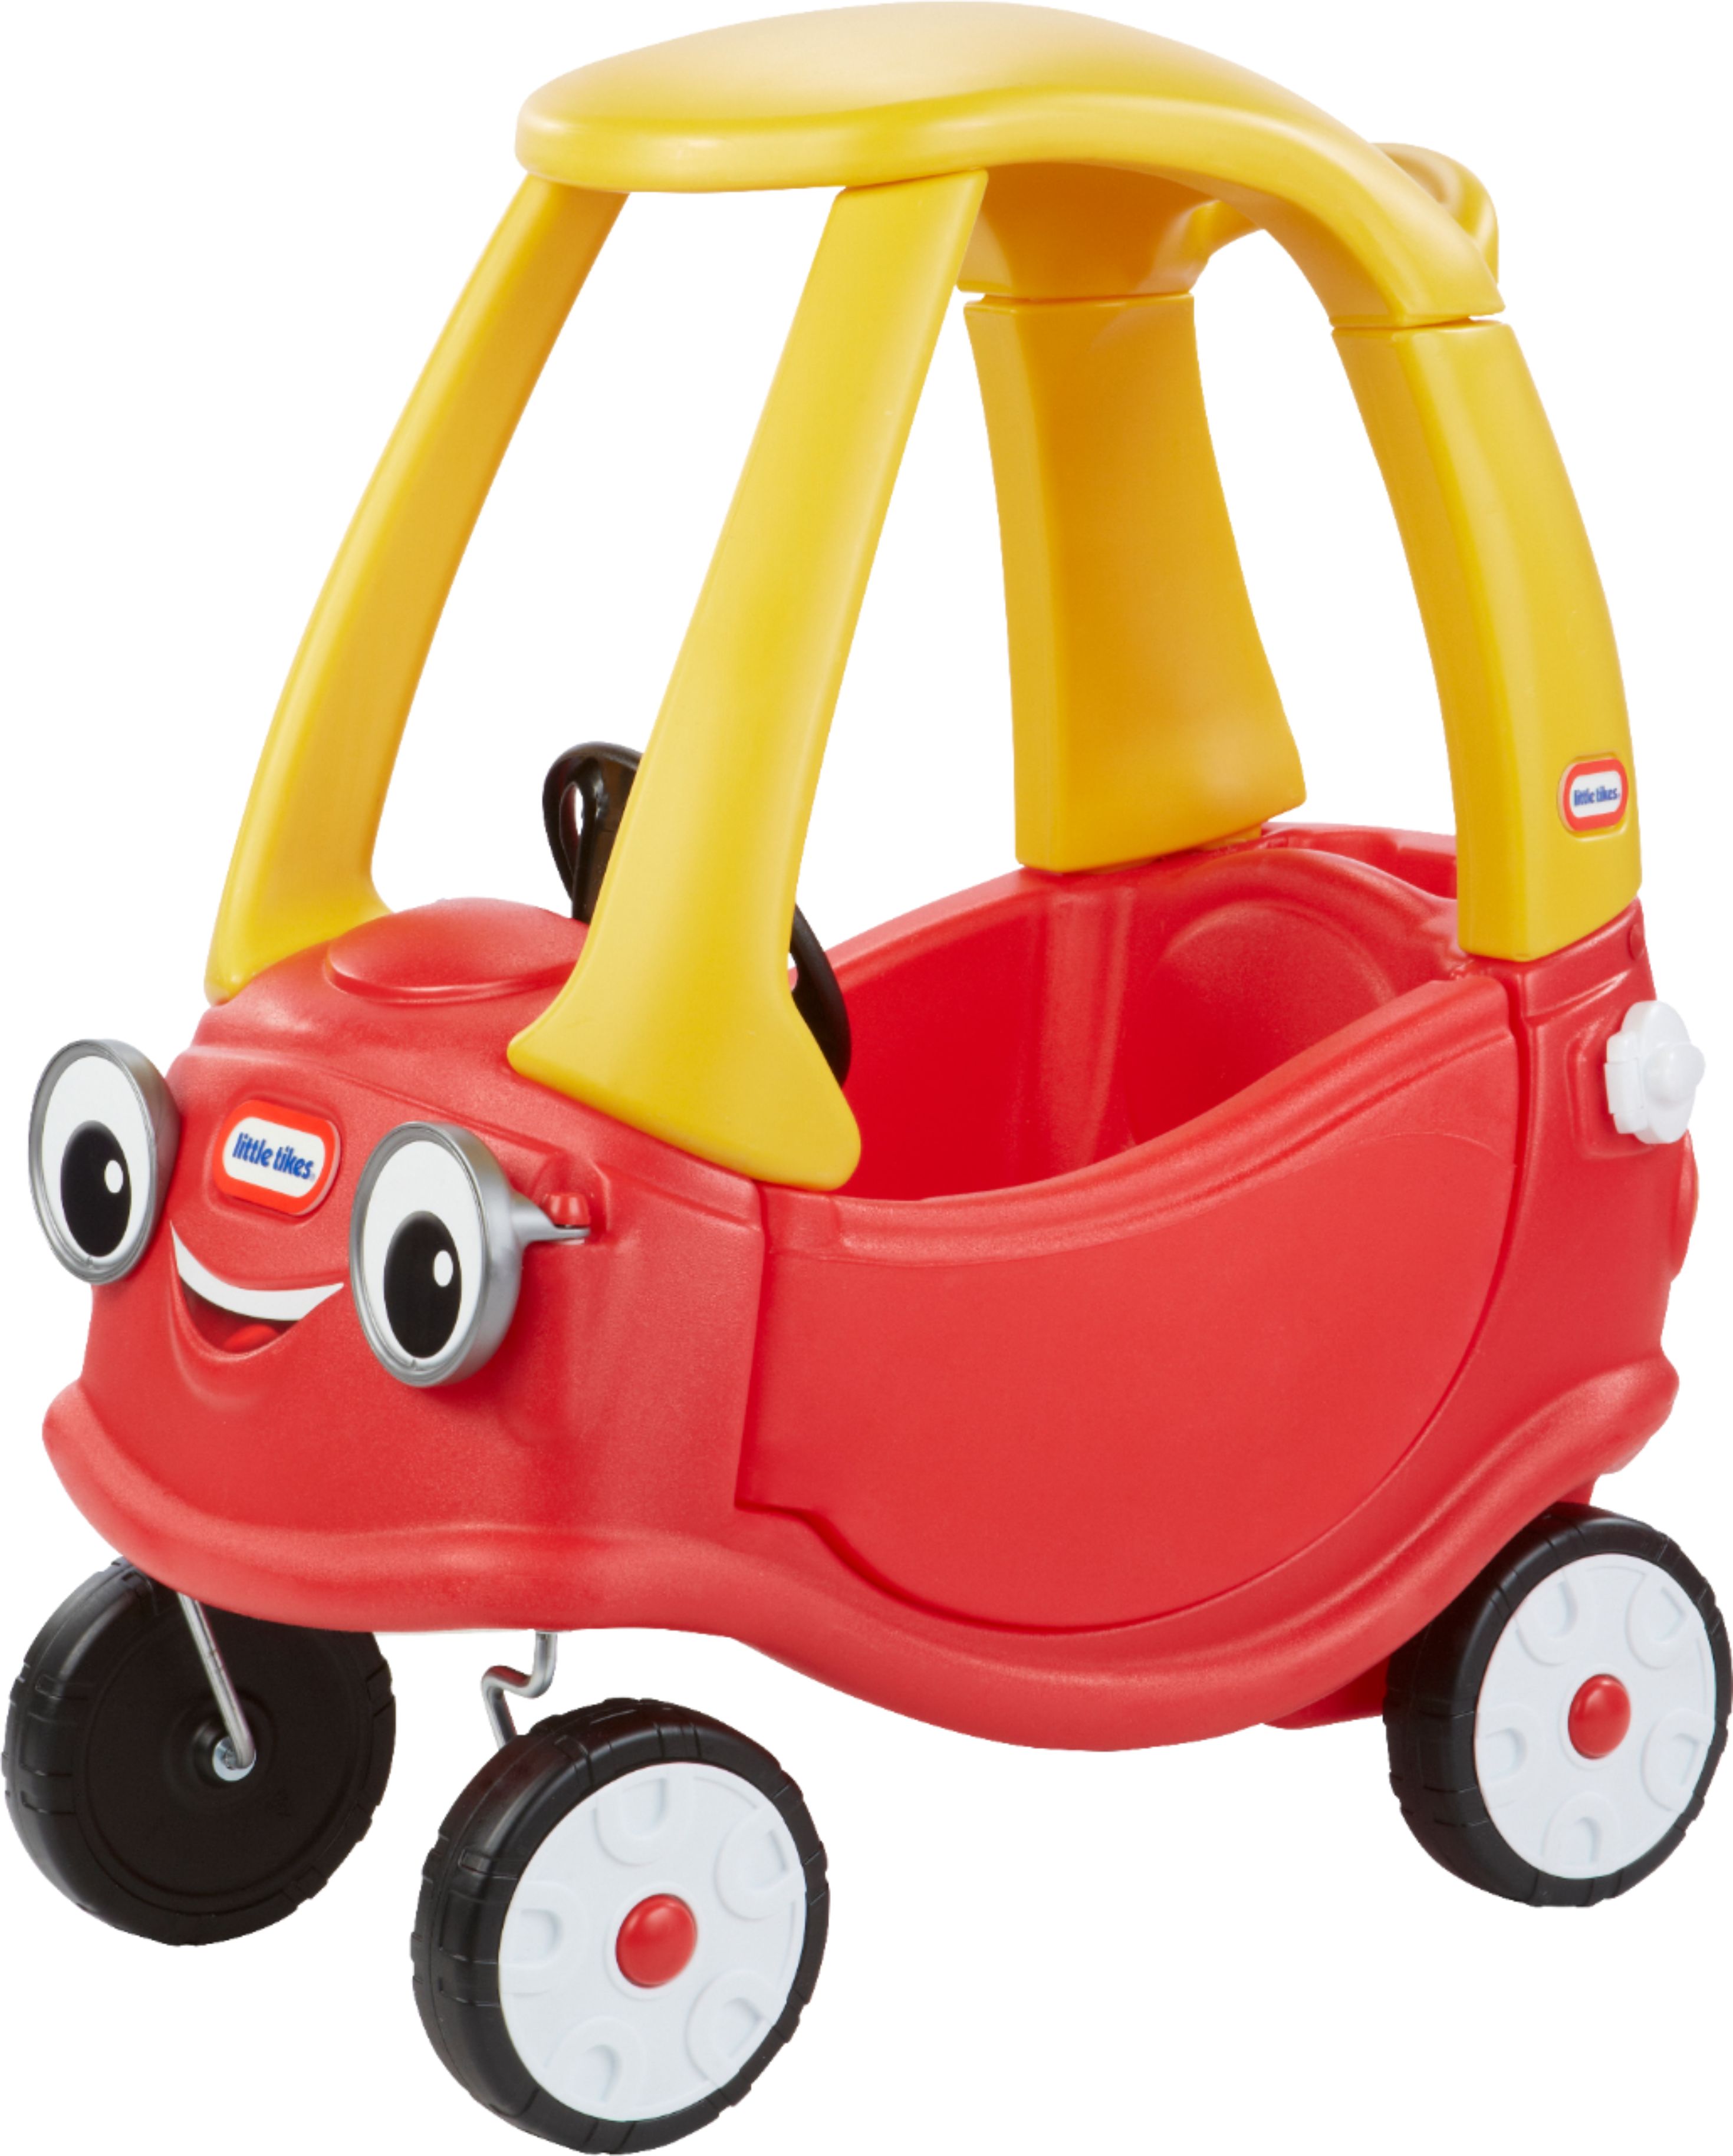 Little Tikes - Cozy Coupe - Yellow and Red